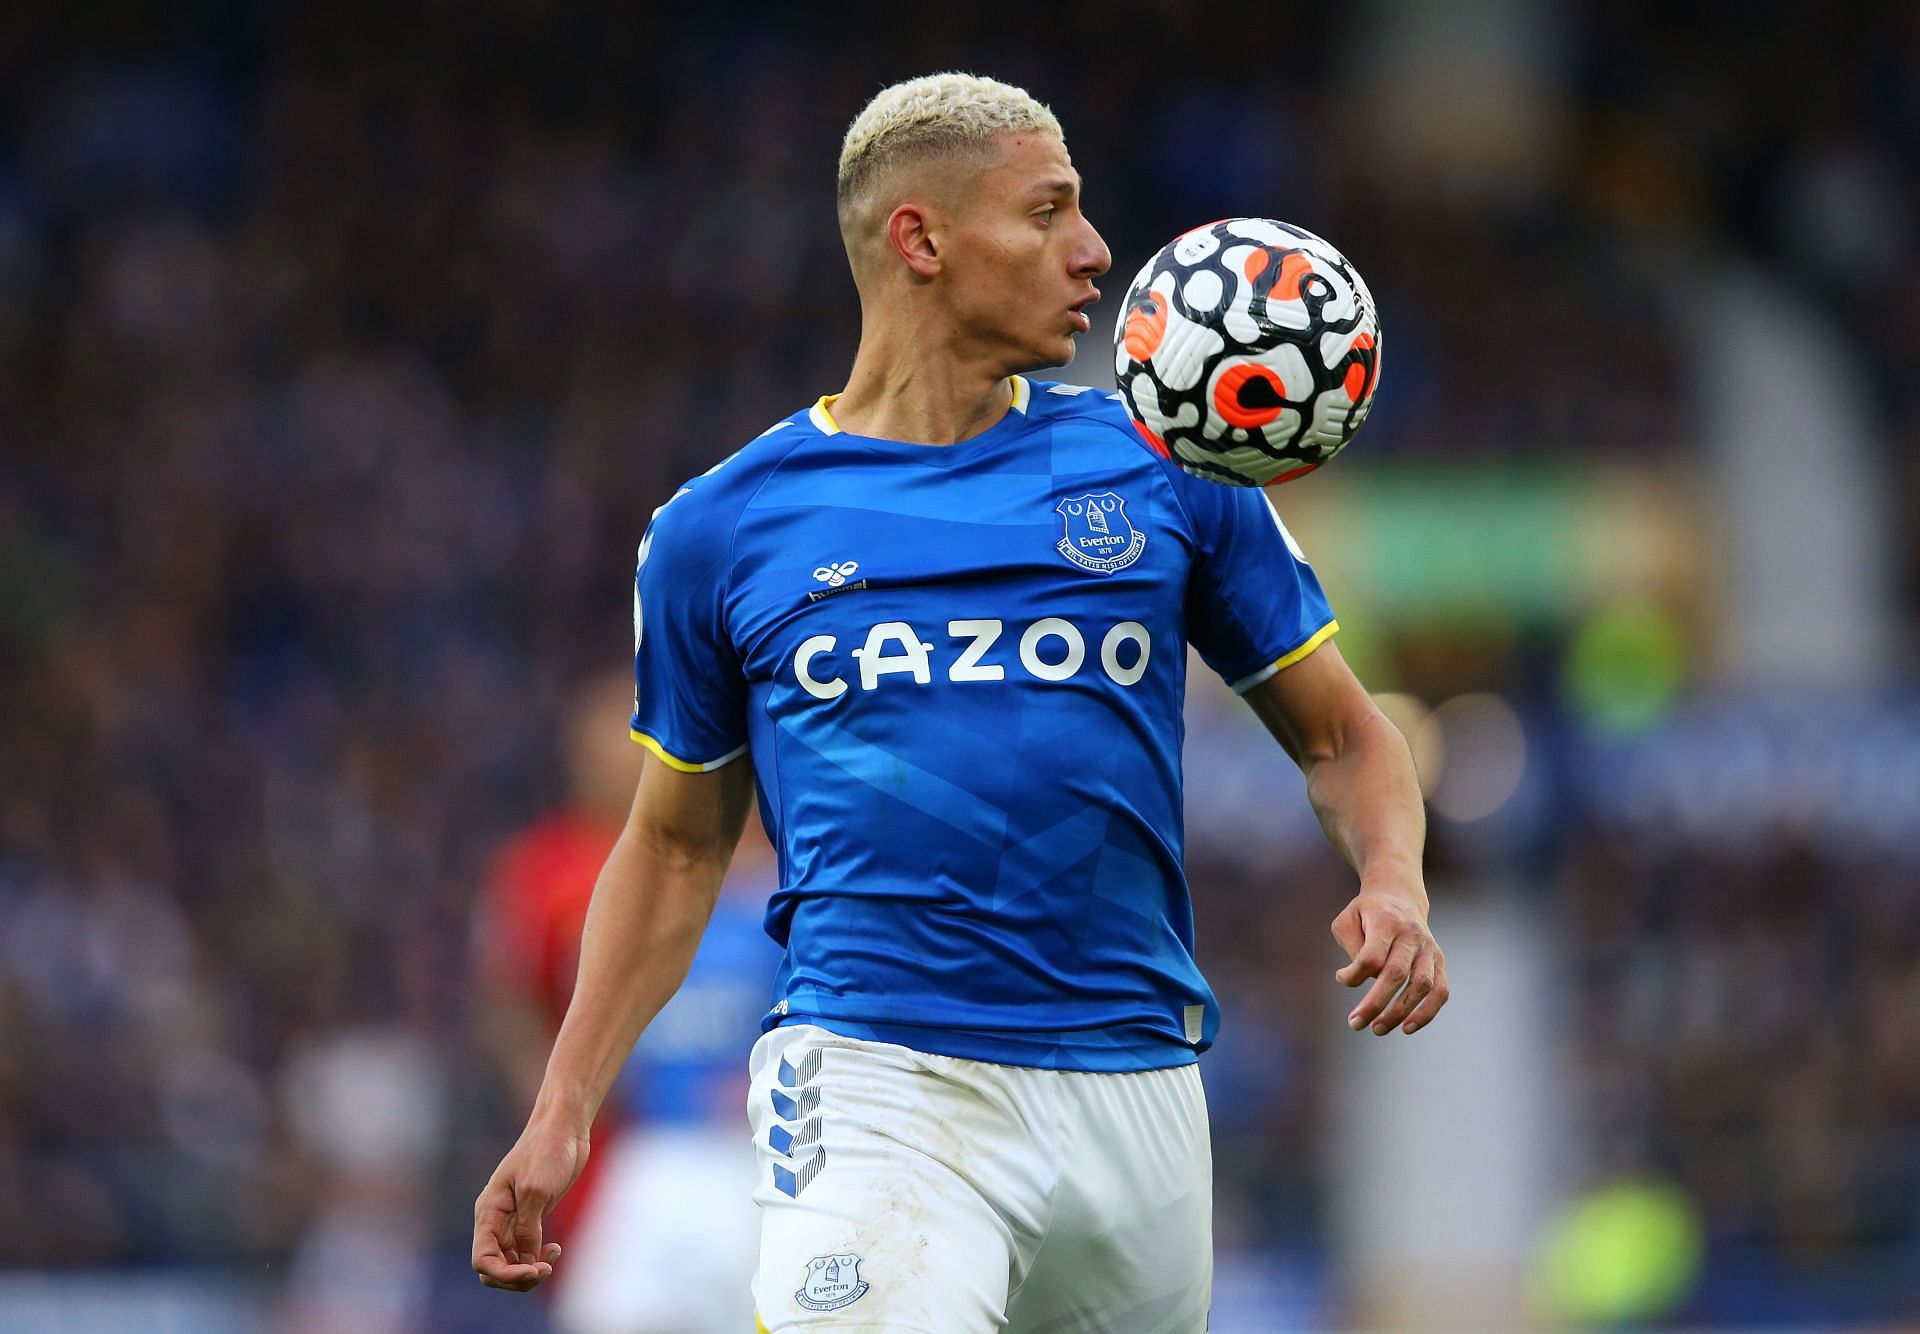 Richarlison returned to starting XI against Wolves after recovering from a knee injury